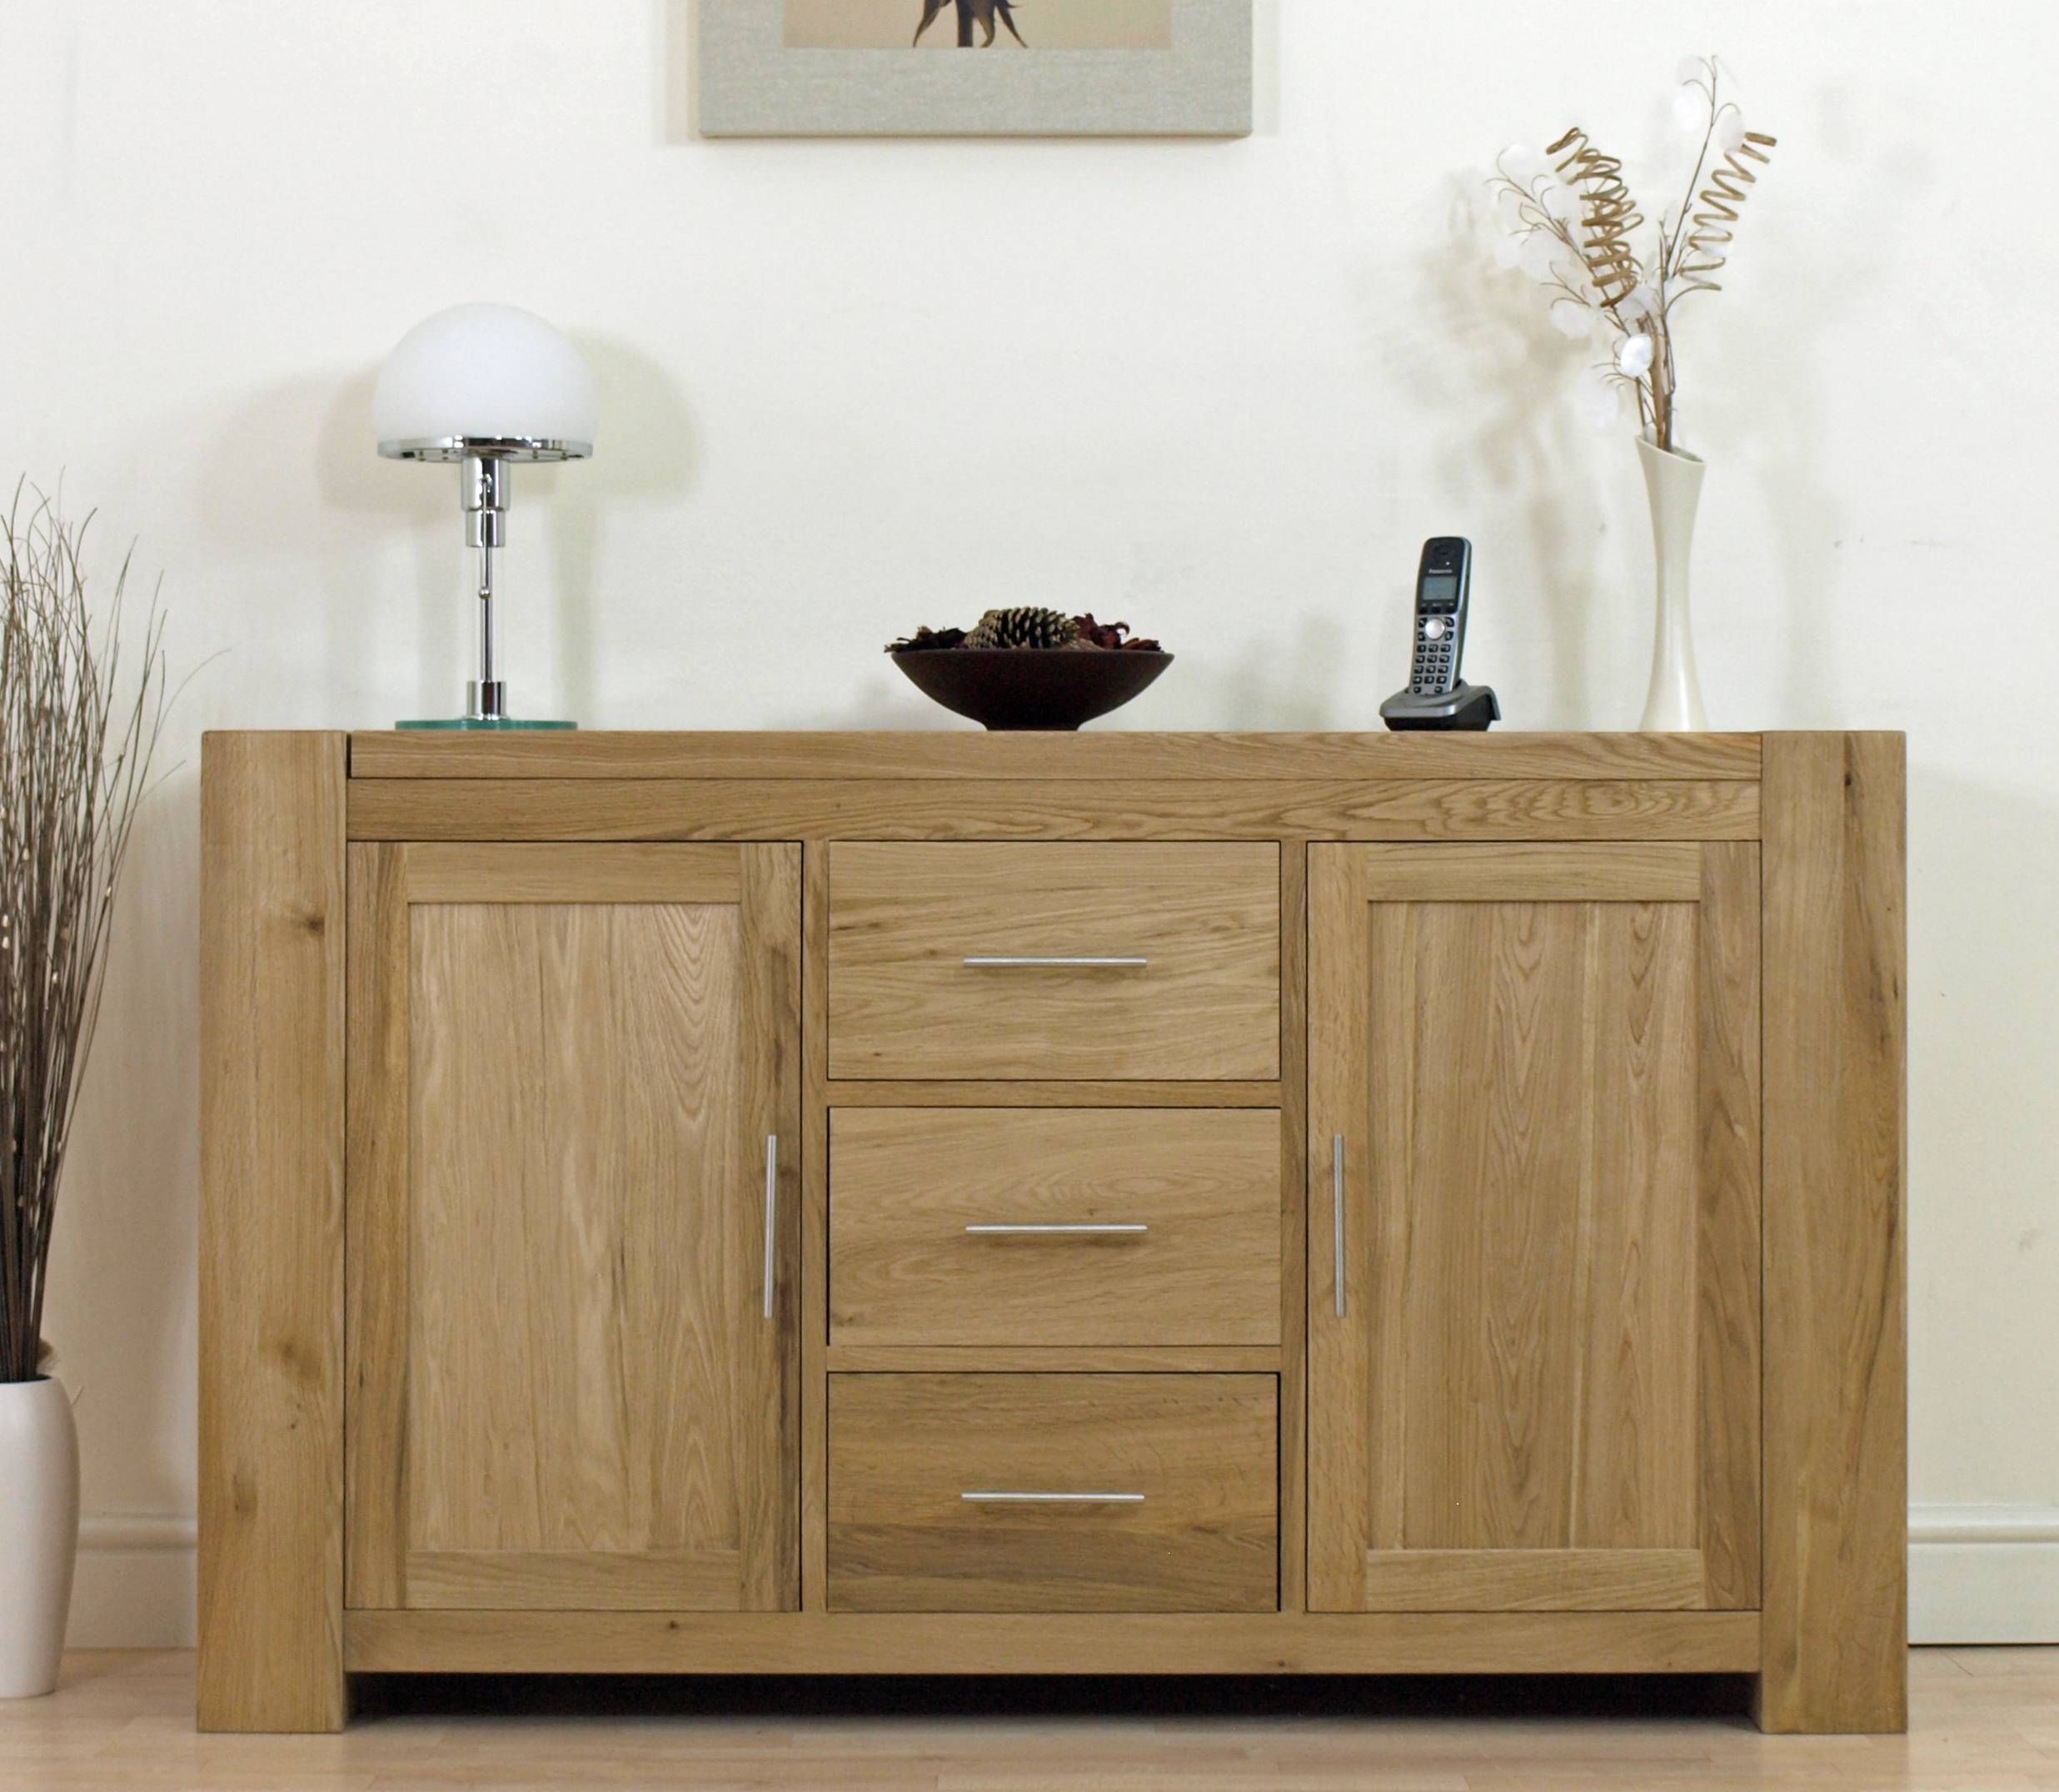 Solid Oak Sideboard Is Your First Choice Living Room Furniture – Hgnv Throughout 2017 Dark Oak Sideboards (View 15 of 15)